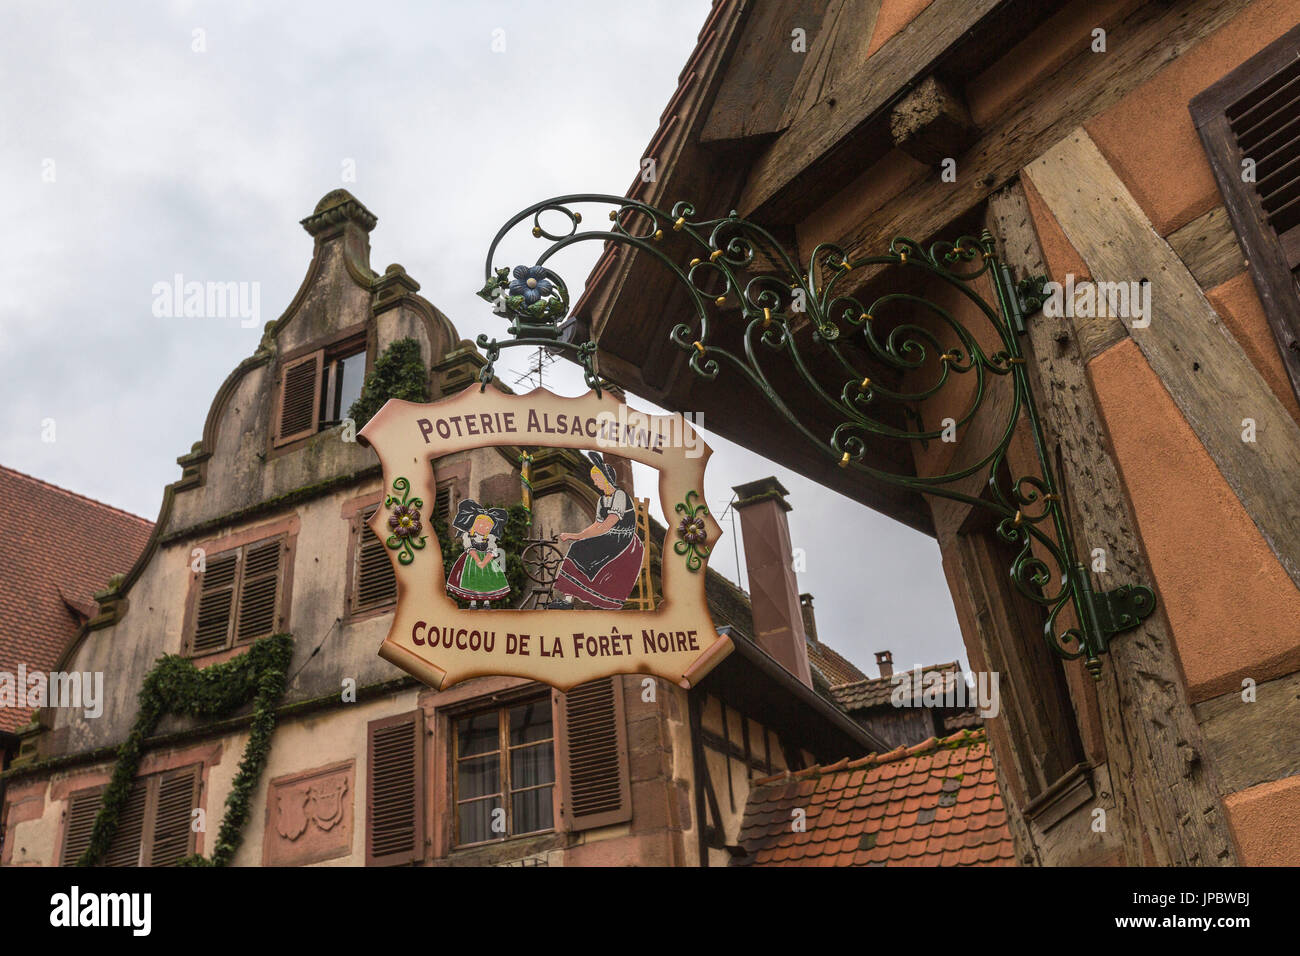 Typical pottery shop in the old medieval town Kaysersberg Haut-Rhin department Alsace France Europe Stock Photo